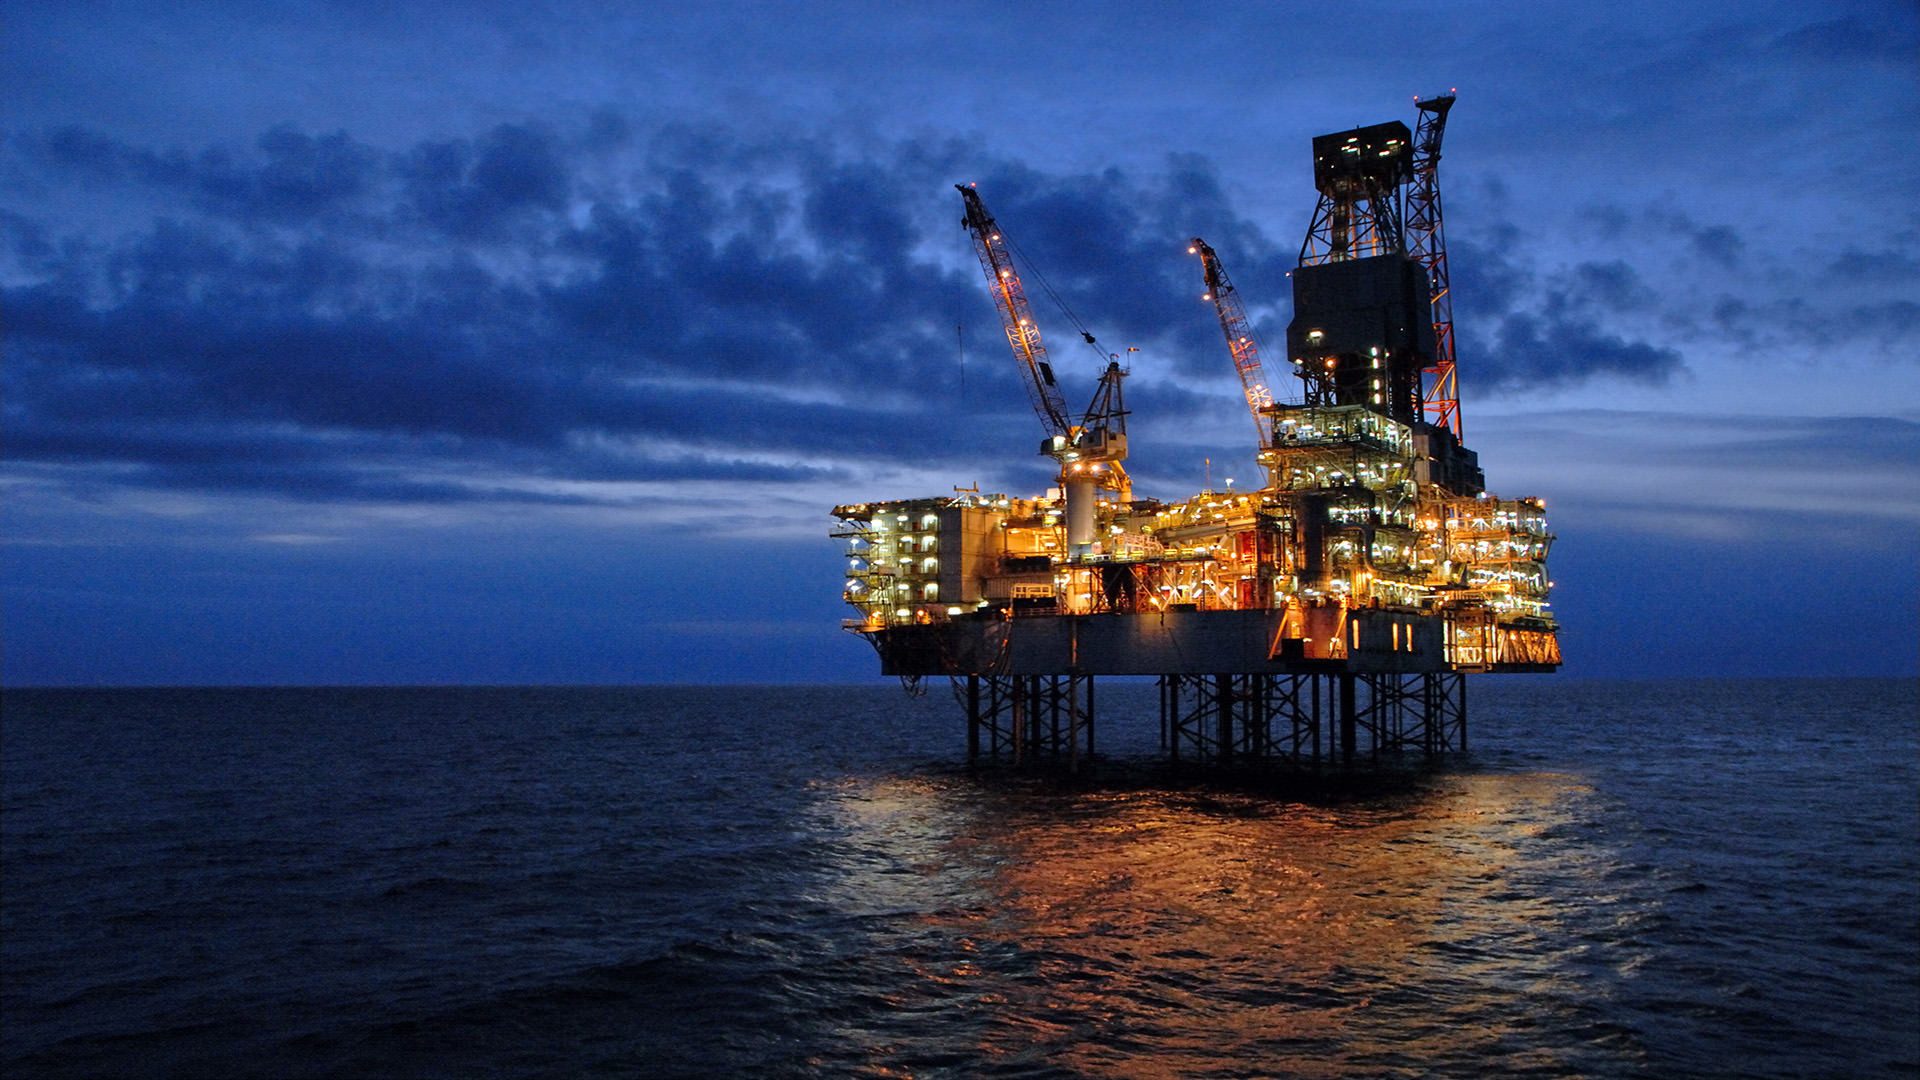 oil rig wallpaper, oil rig, semi submersible, offshore drilling, vehicle, jackup rig